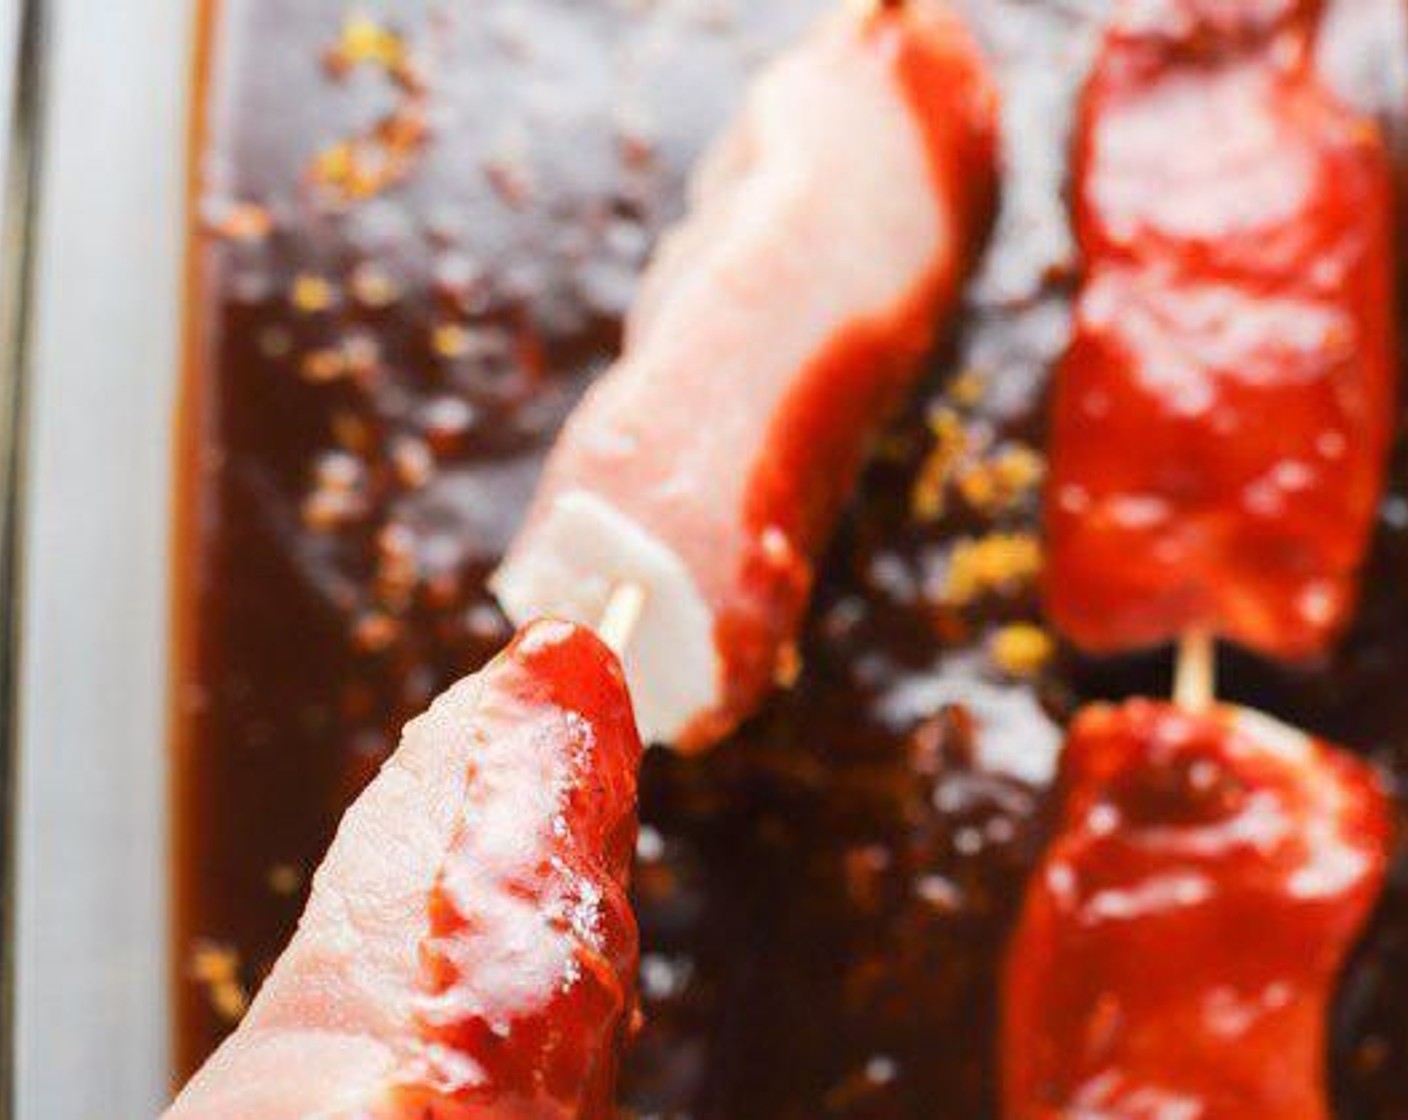 step 2 Cut Boneless Pork Chops (2 lb) into long strips. Put 2-3 pieces on wooden skewers lengthwise. Place each pork skewer into the sauce mix and spin them to coat all sides. Cover the dish with plastic wrap and marinate in the refrigerator for 3-6 hours, or overnight.